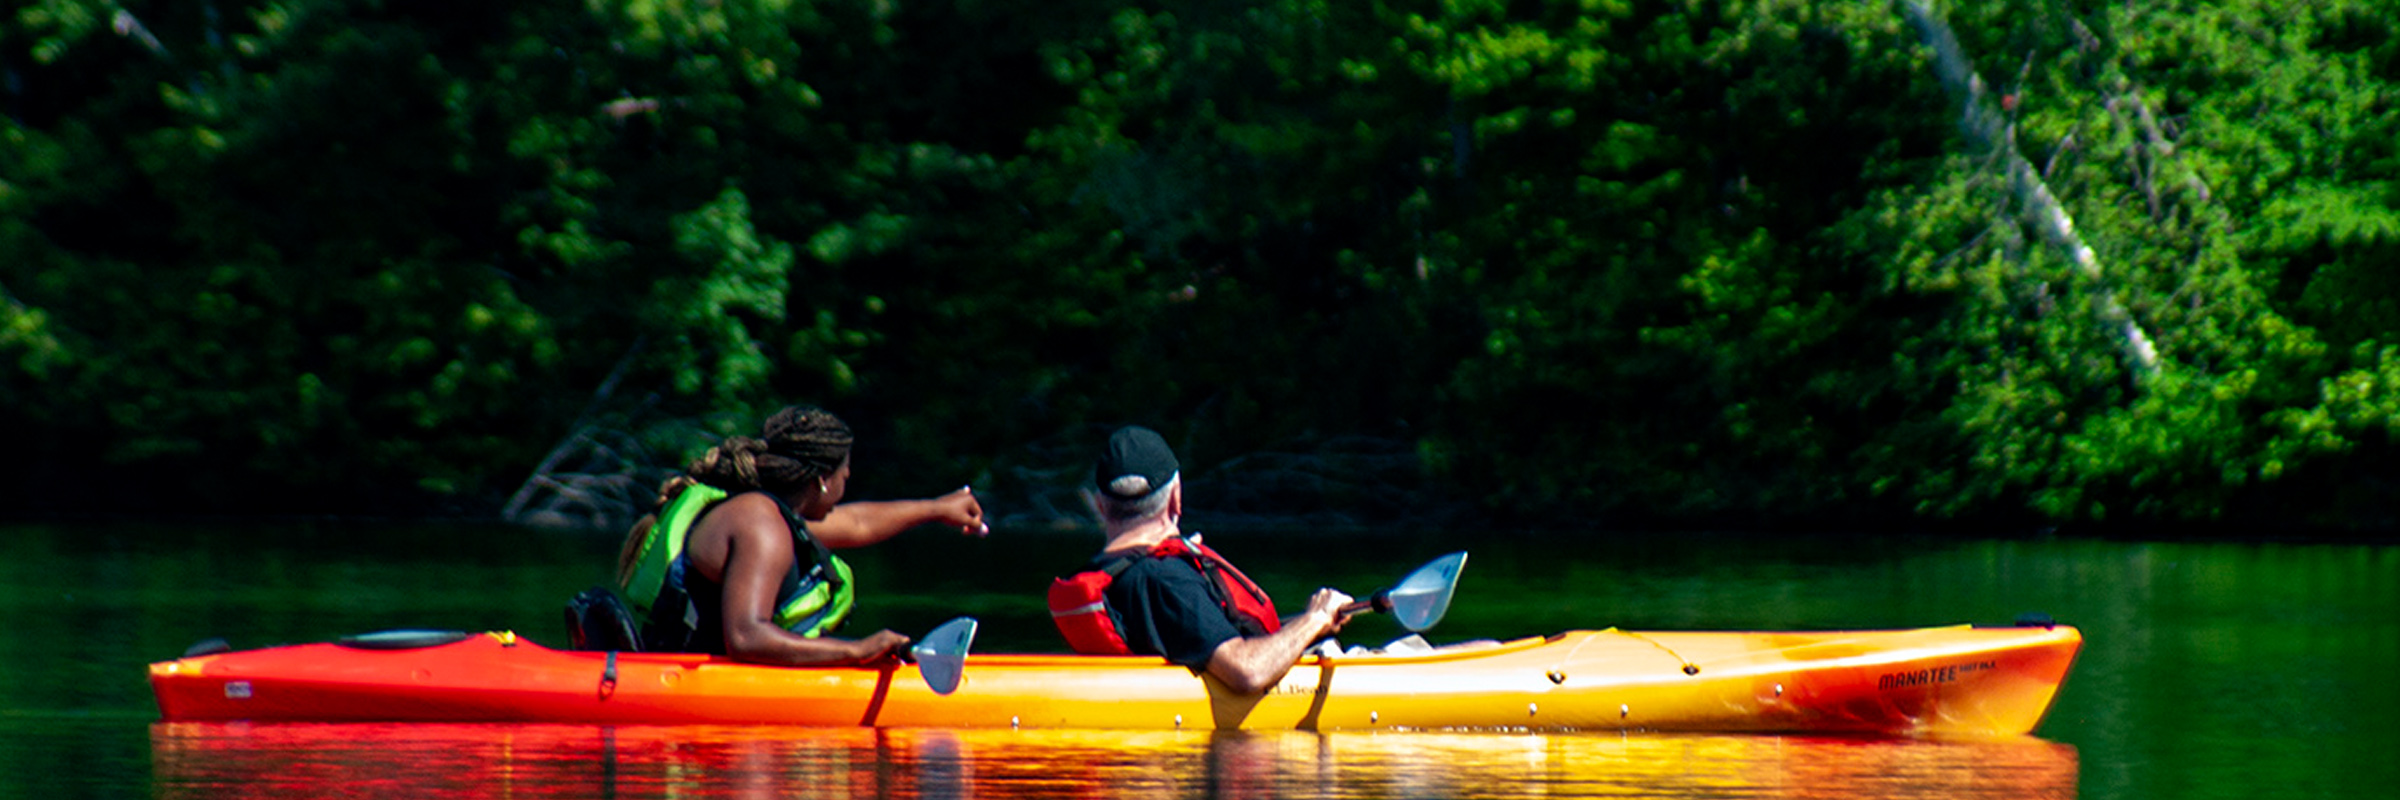 Two individauls sit in a tandem kayak on water together. One person is pointing to the trees.